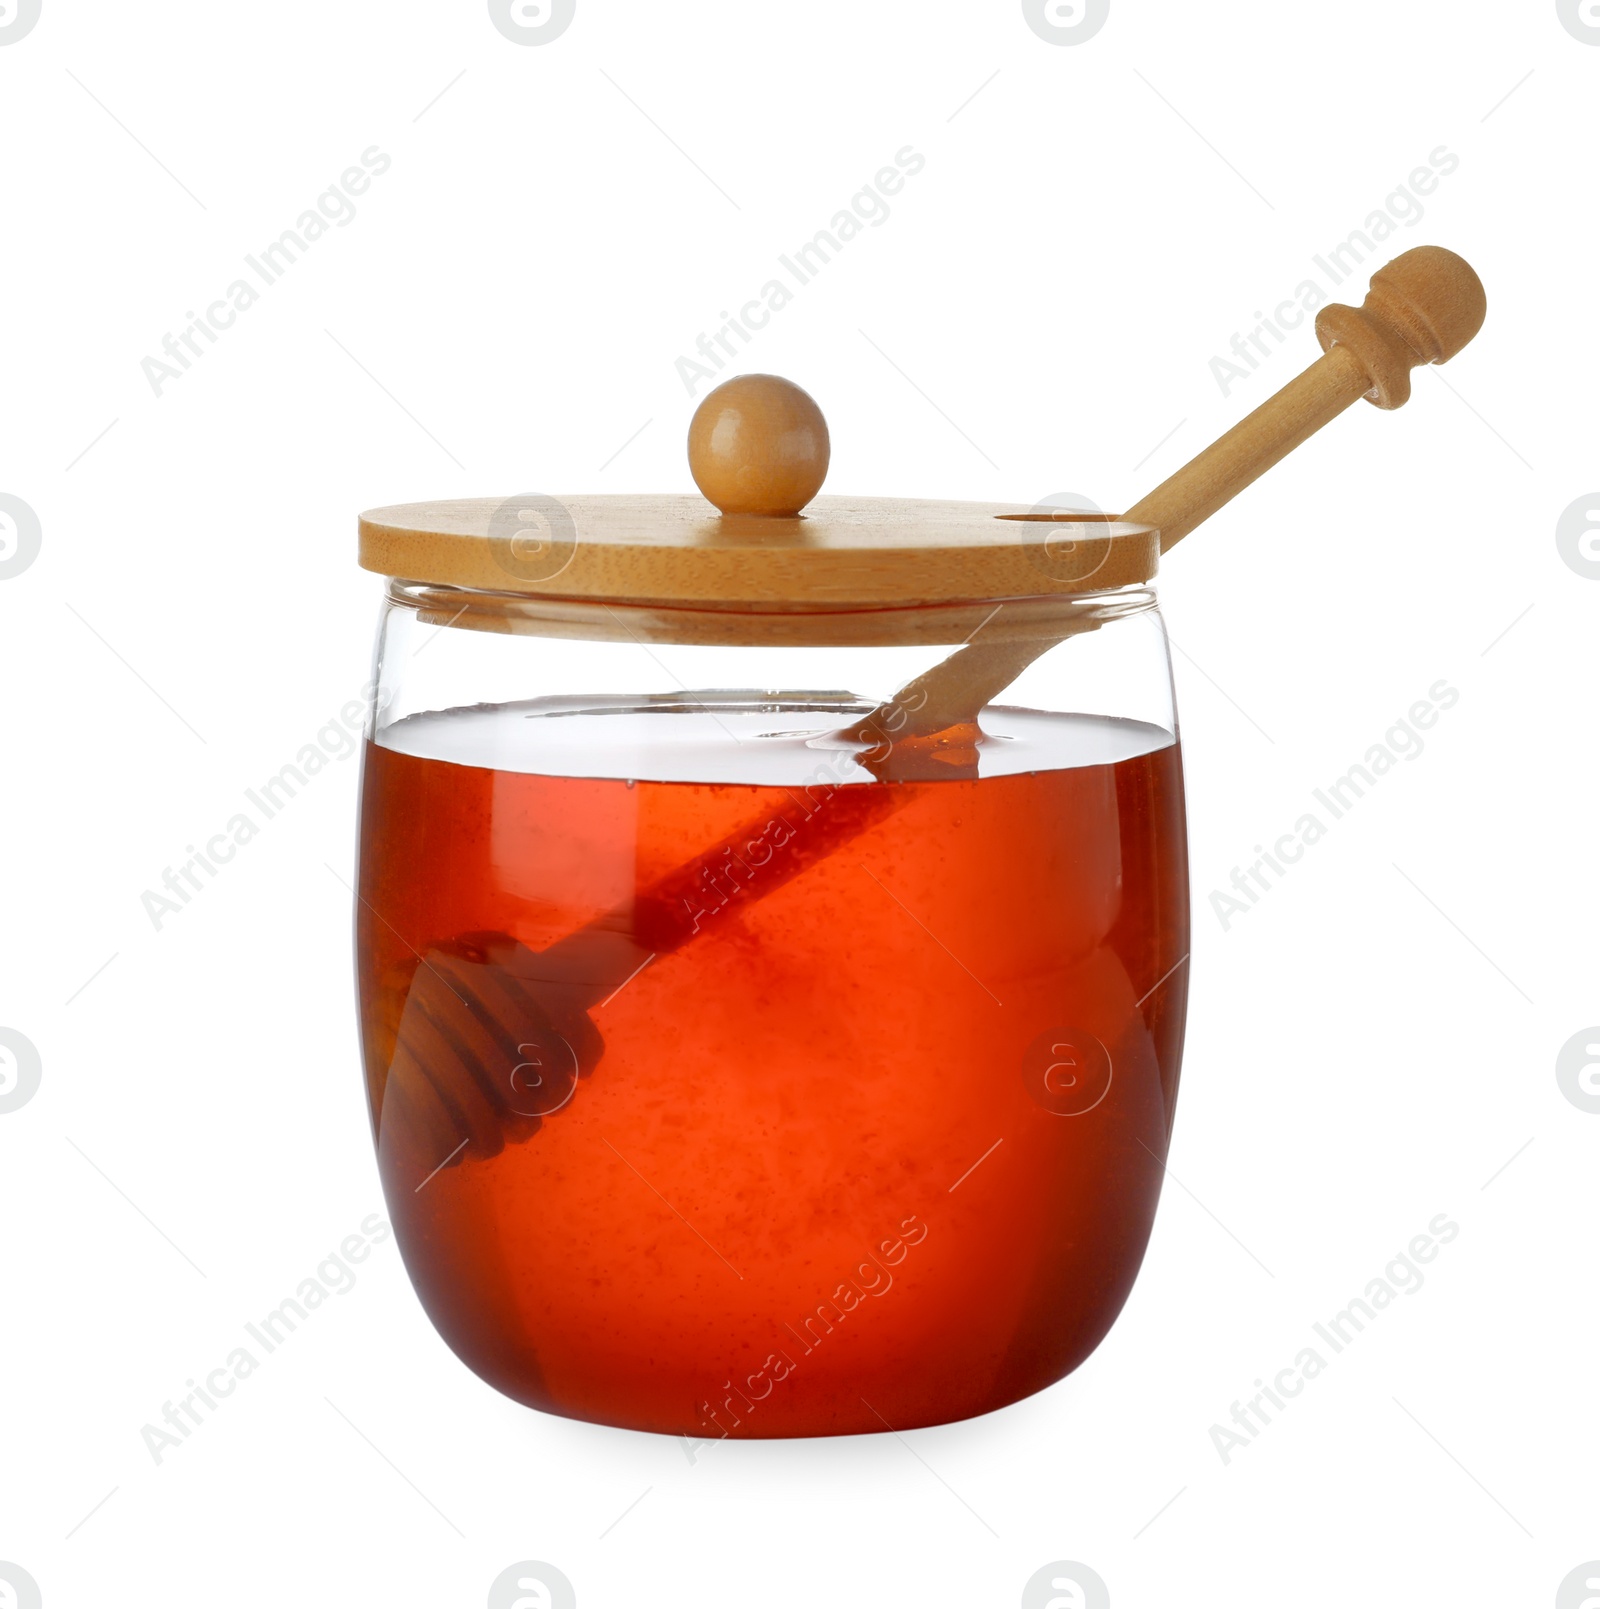 Photo of Jar with organic honey and dipper isolated on white